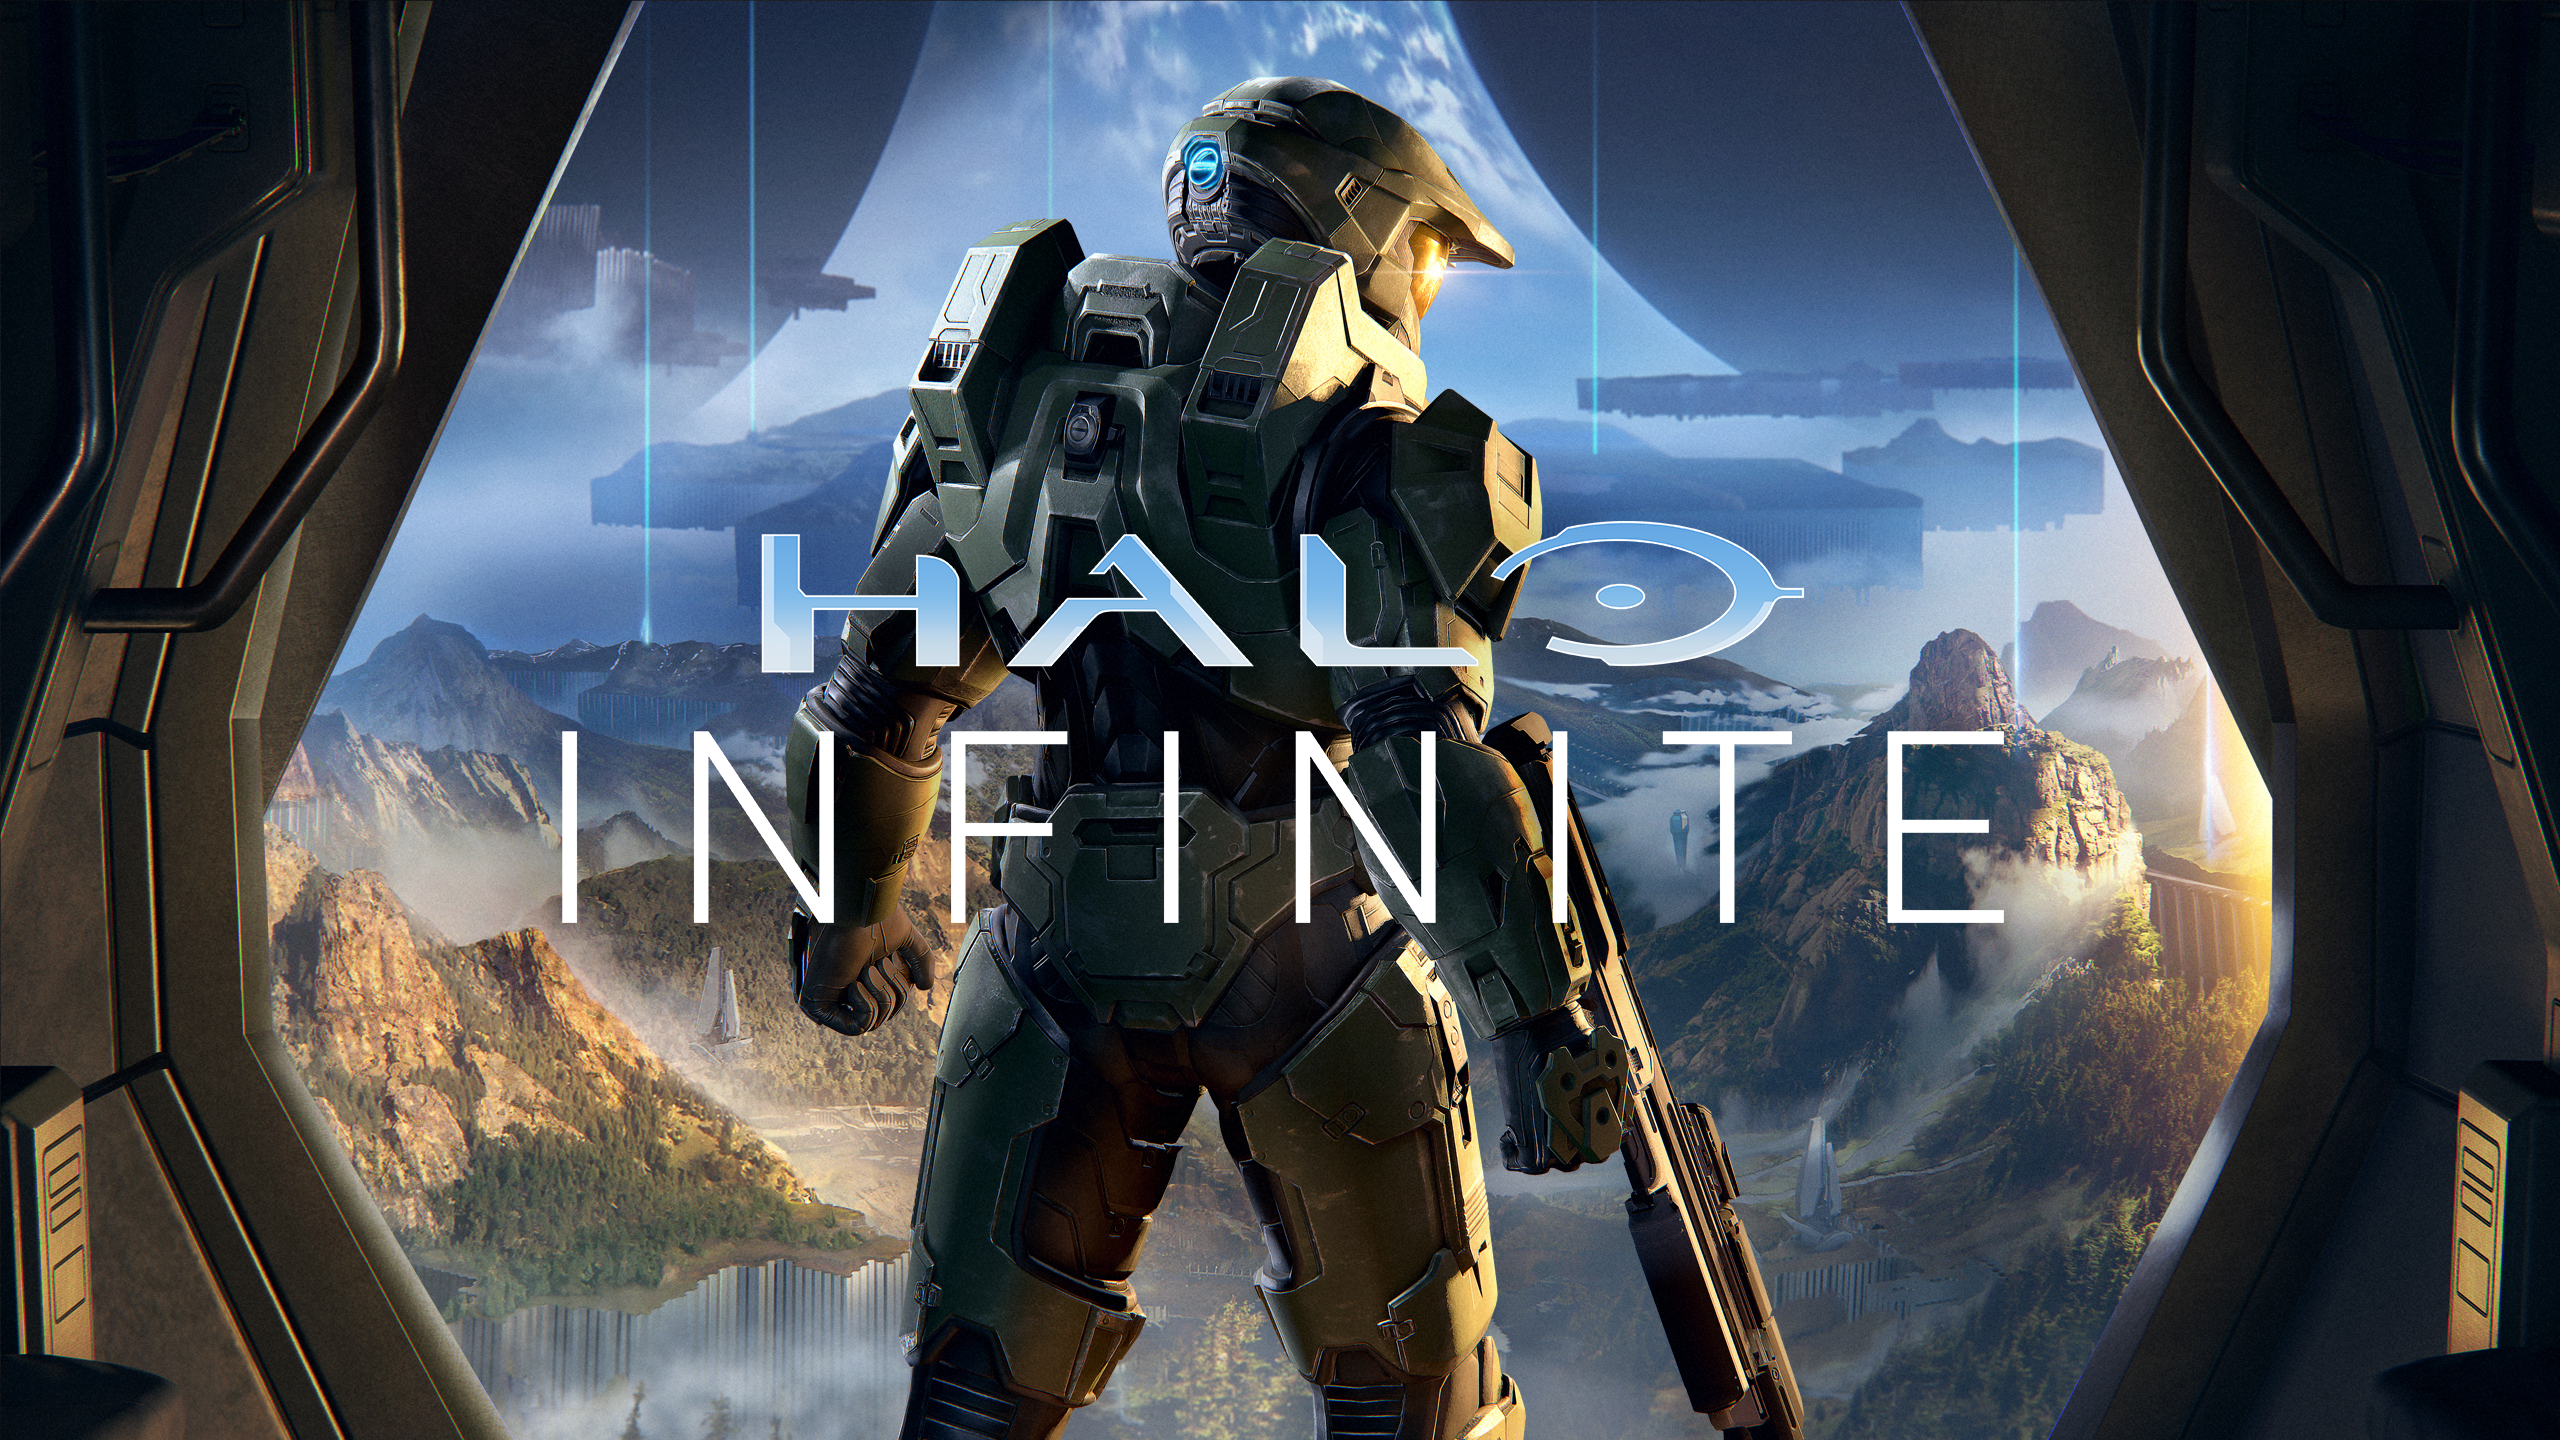 Cool Halo Infinite 2020 Wallpapers